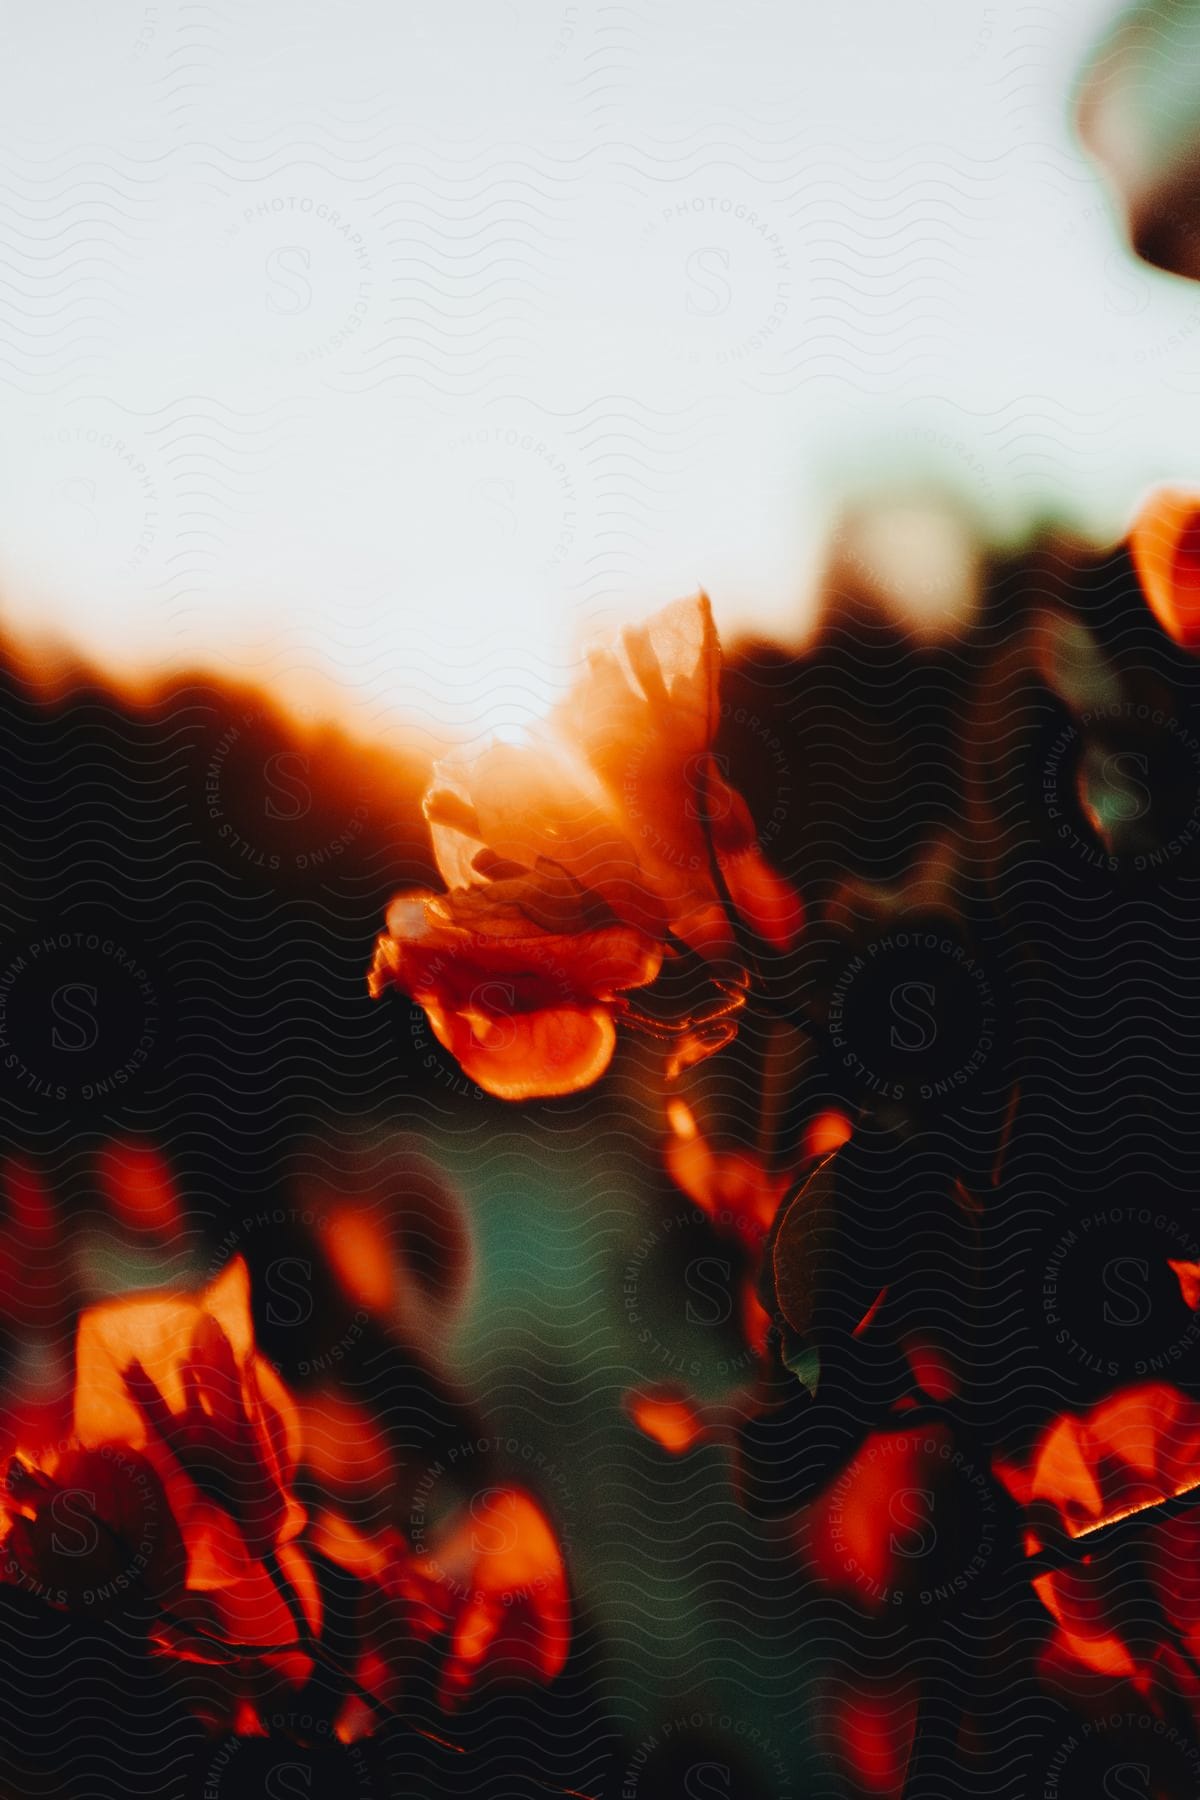 A close-up of orange-tinted blooming flowers against a blurry sunset background.